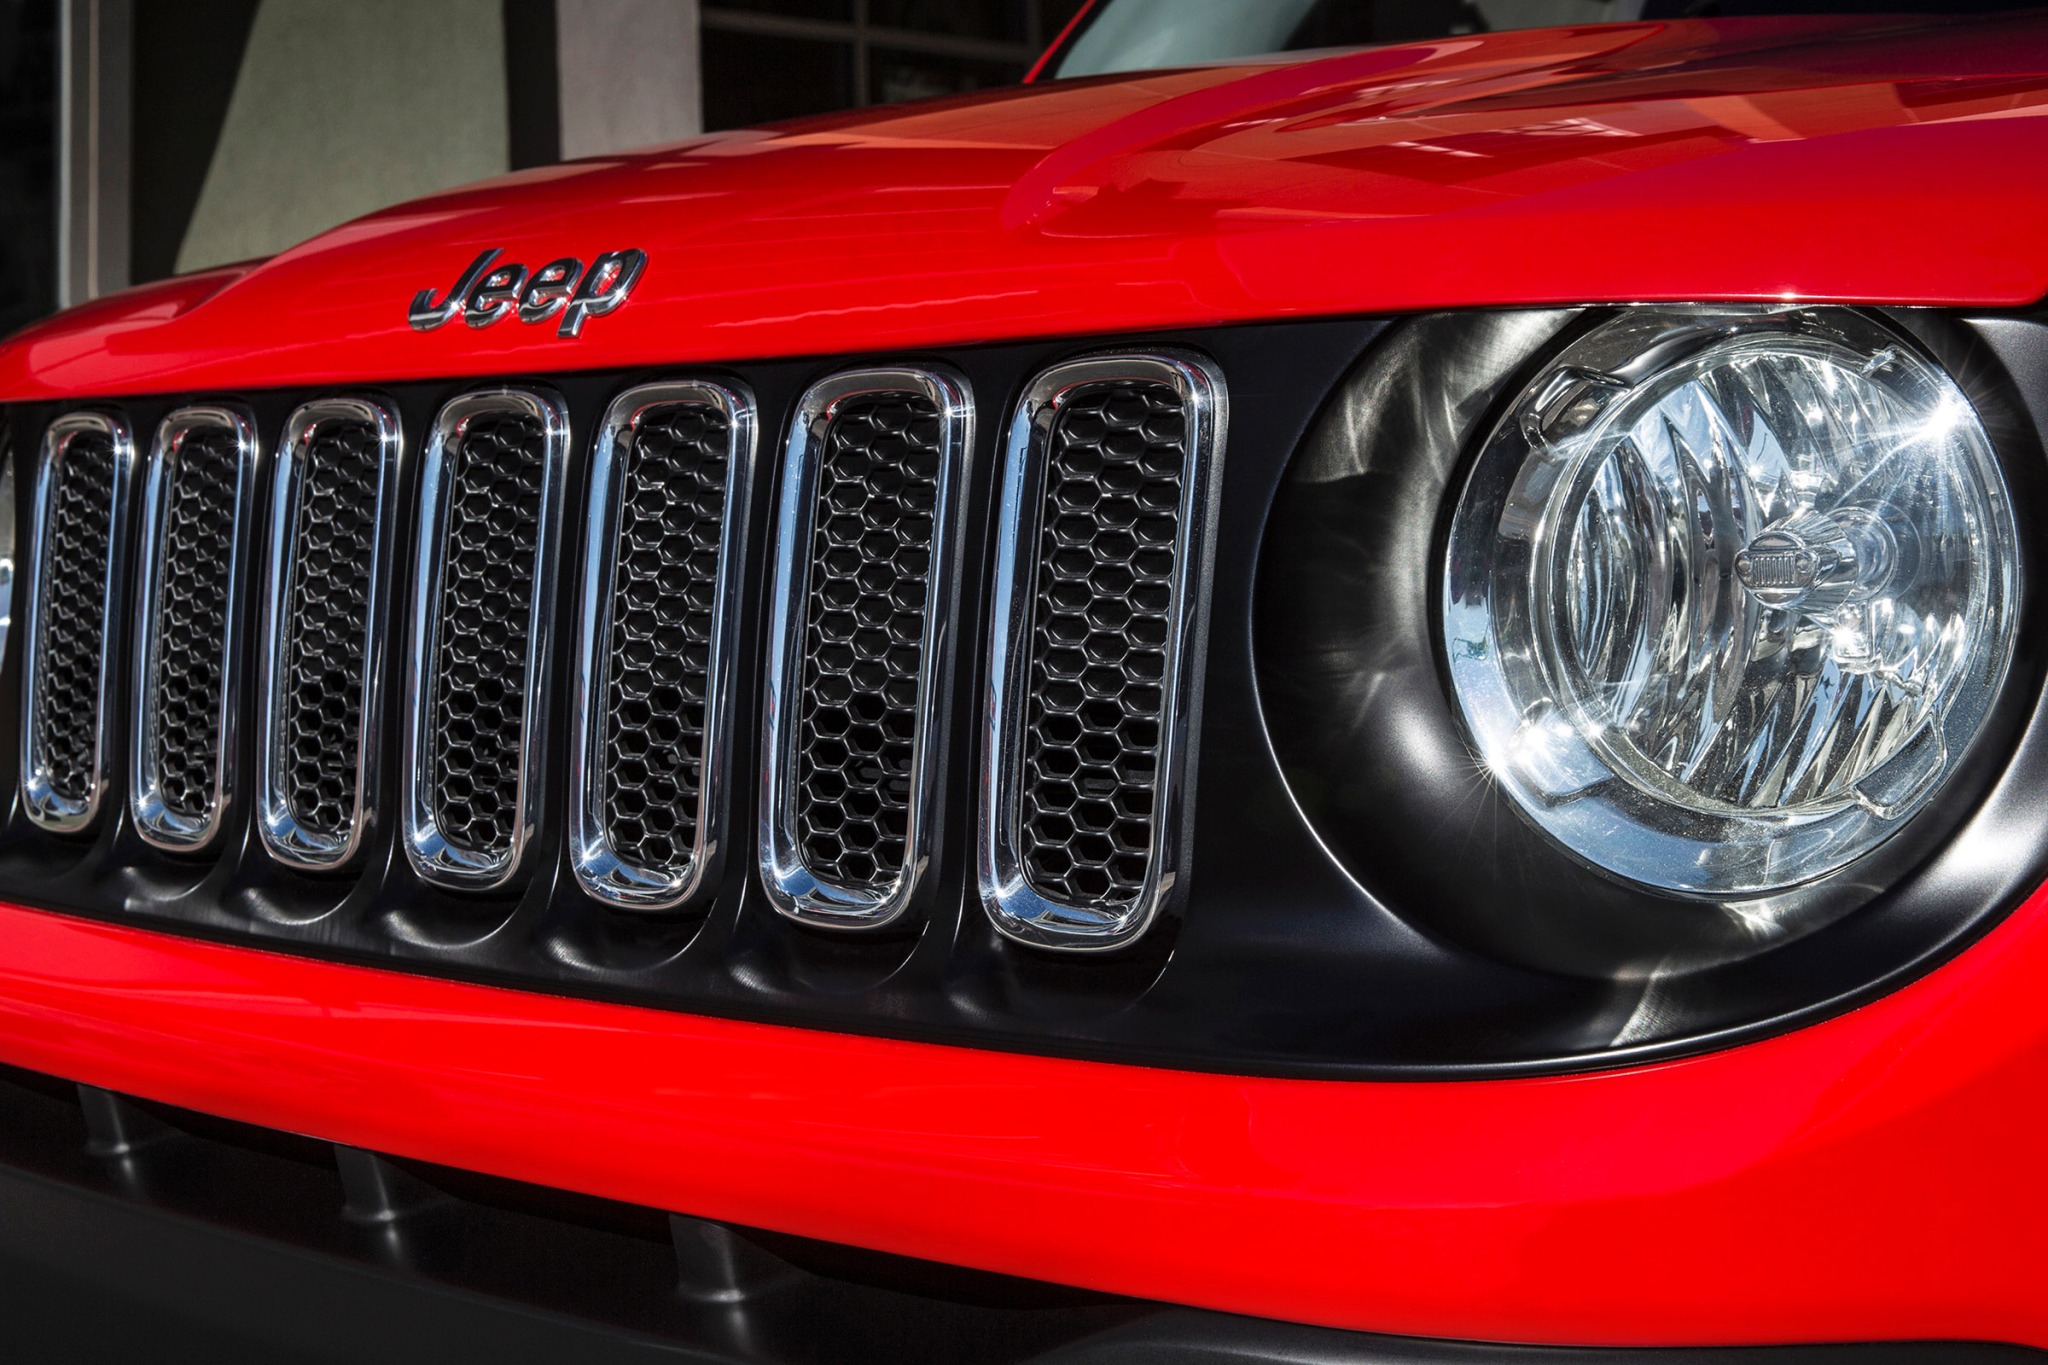 2015 Jeep Renegade Sport FWD VIN Number Search - AutoDetective